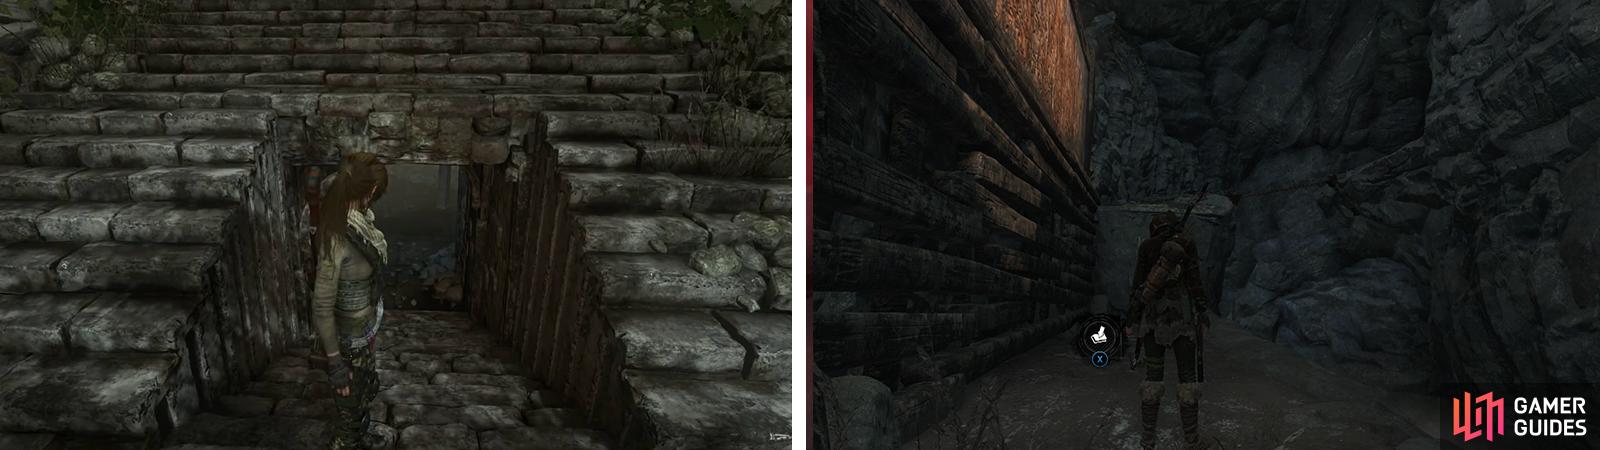 After the scene, head down the secret passage to enter the Orrery (left). Beneath the first weak wooden wall is Survival Cache 01 (right).